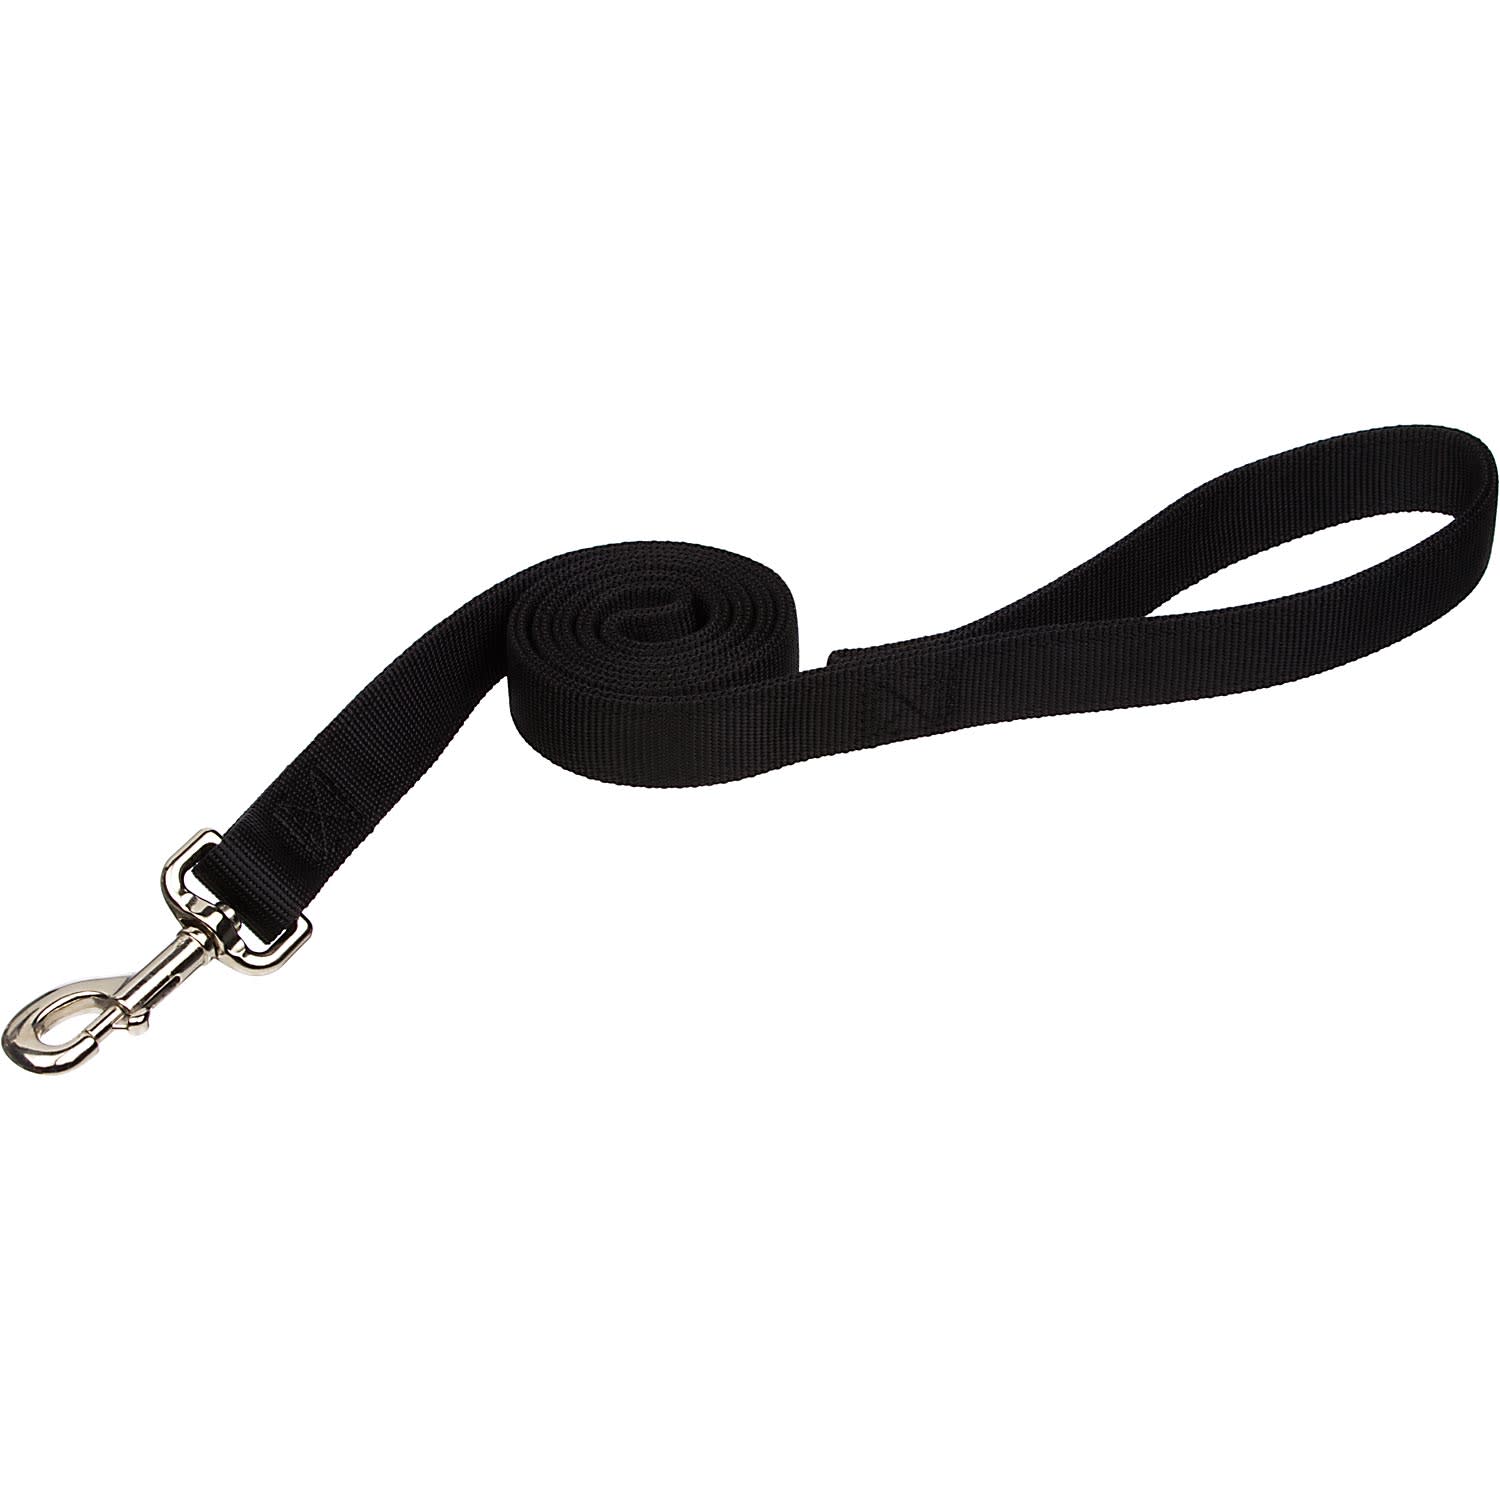 Photos - Collar / Harnesses Coastal Pet Double Ply Nylon Personalized Dog Leash in Black, 